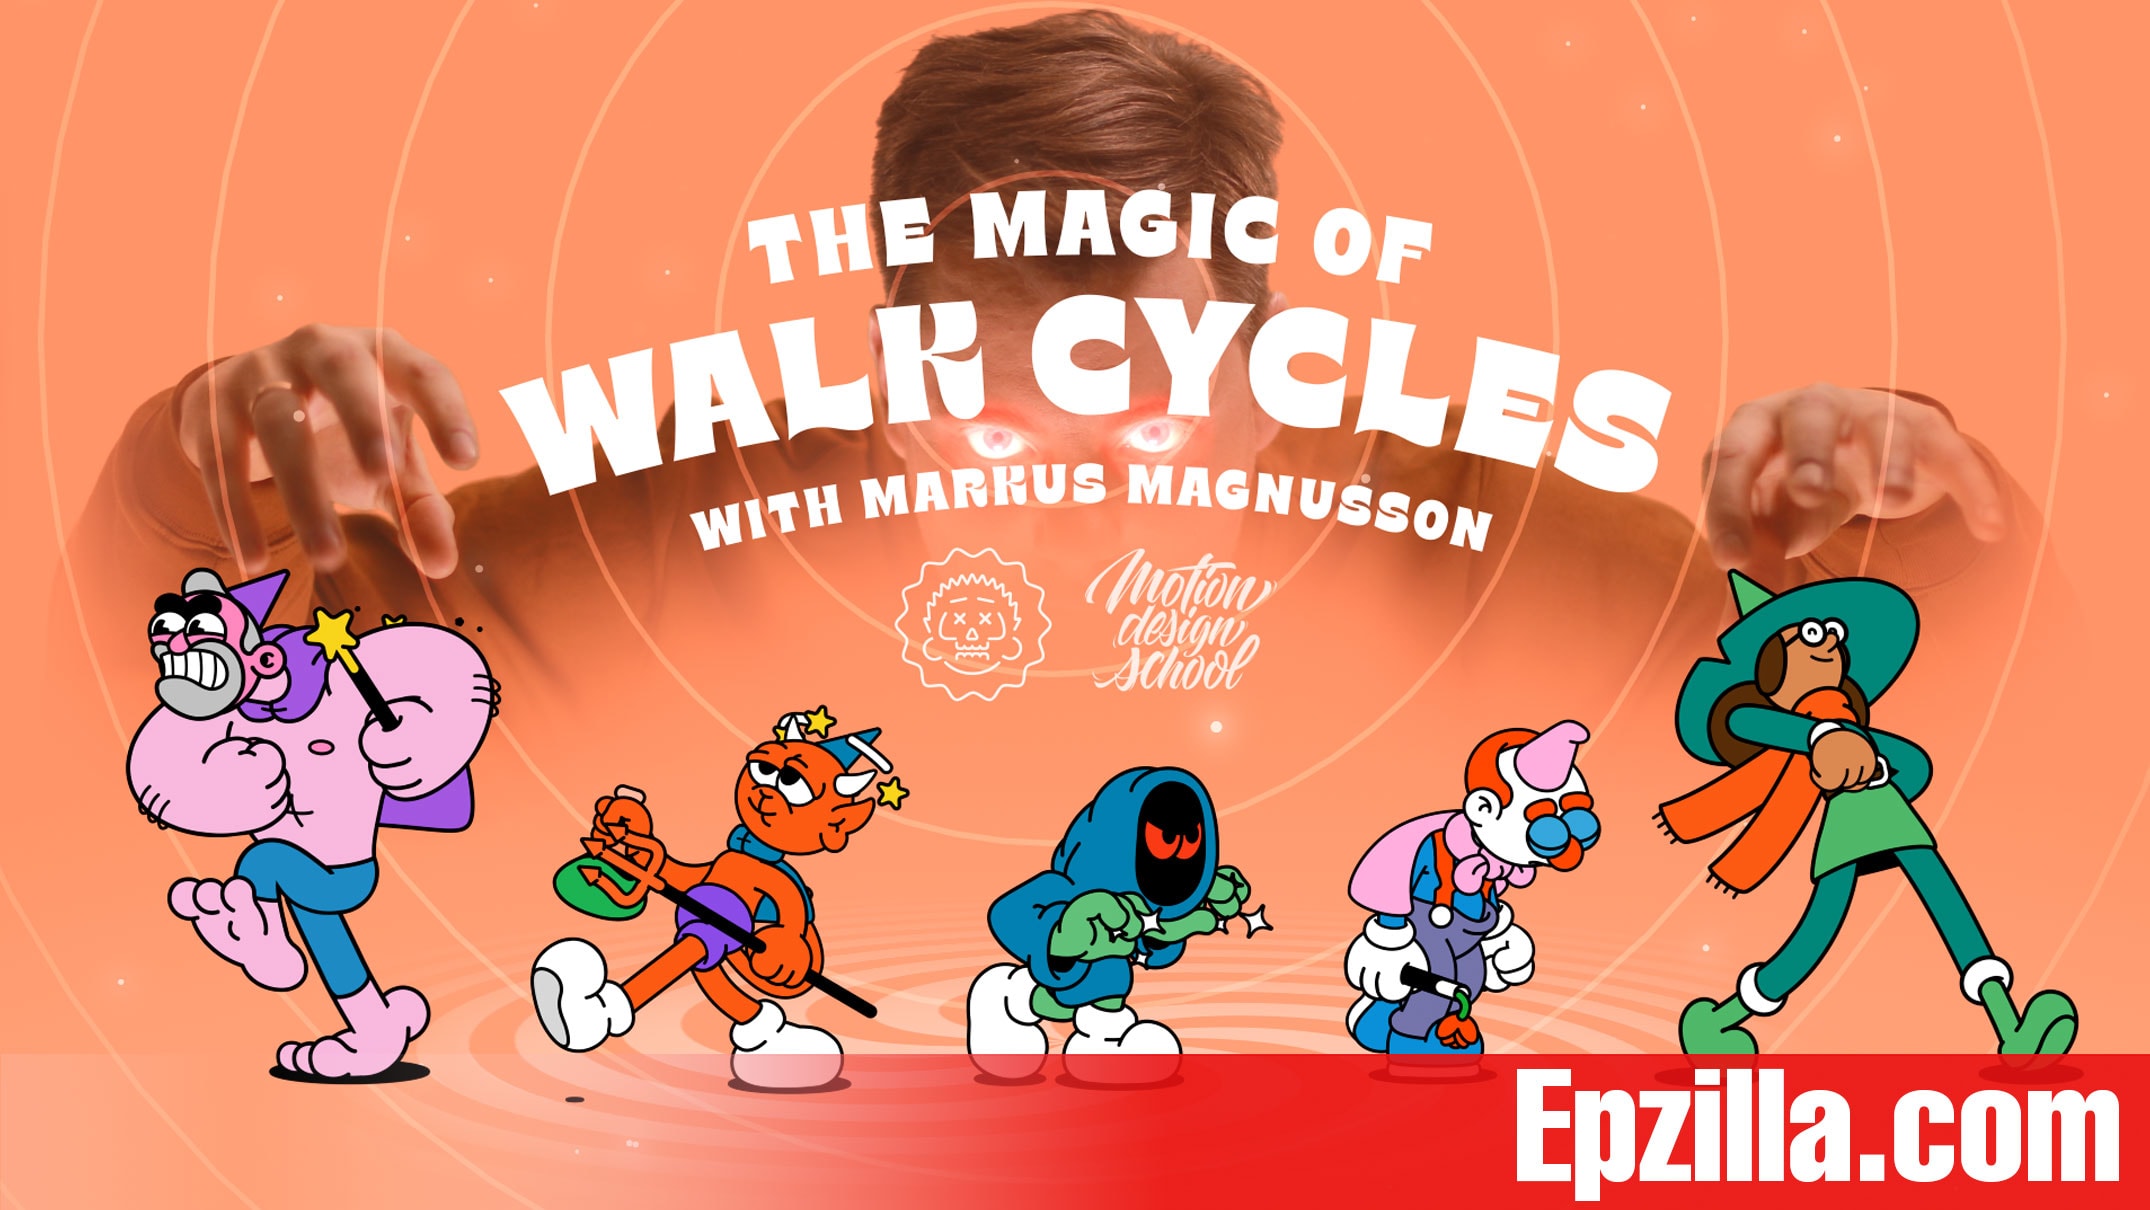 Motion Design School The Magic of Walk Cycles With Markus Magnusson Free Download Epzilla.com